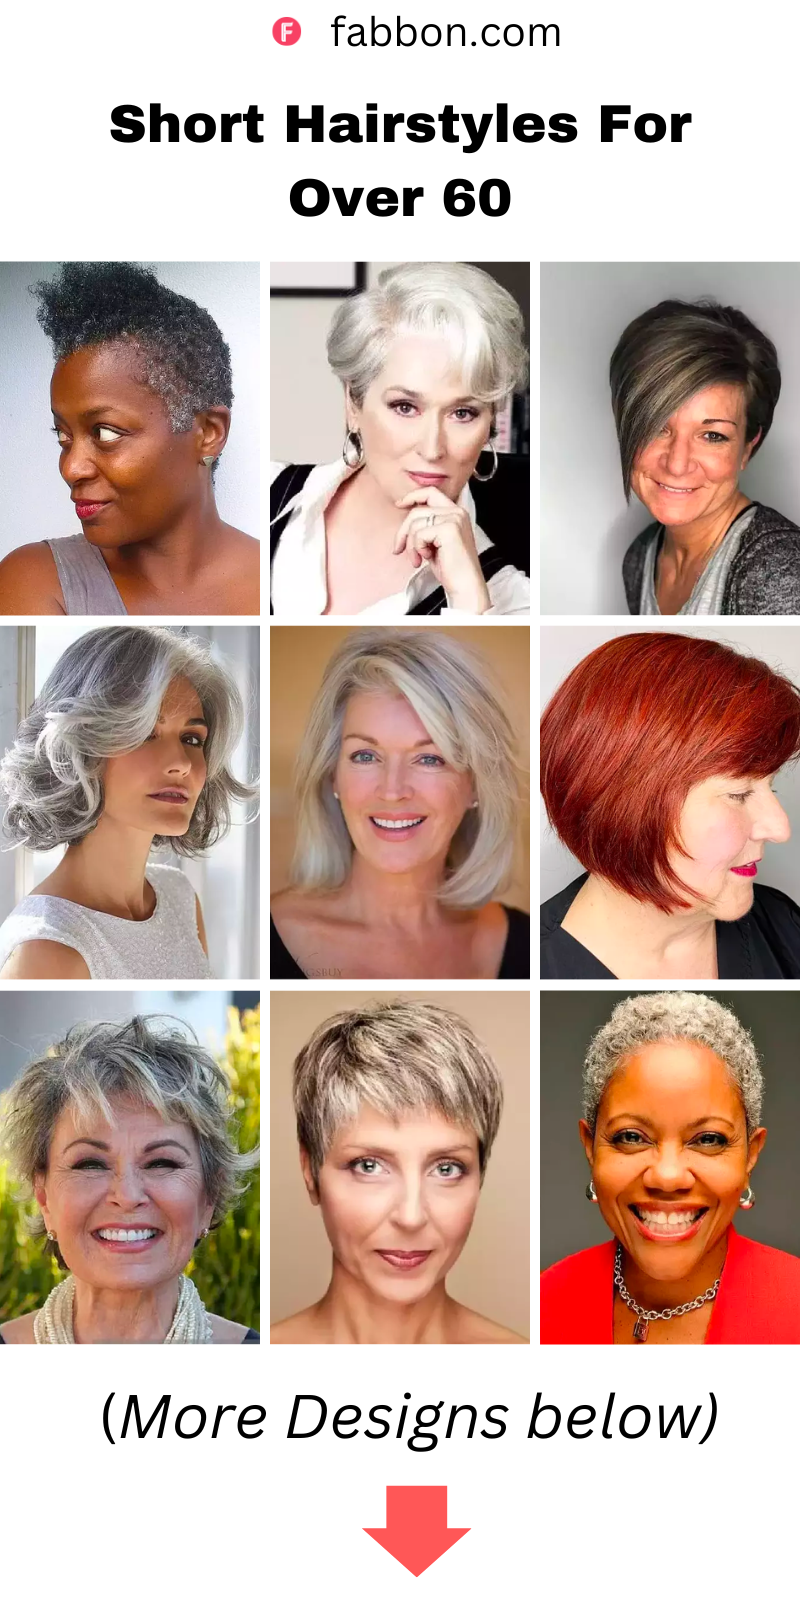 Ladies short hairstyles over 60 - YouTube